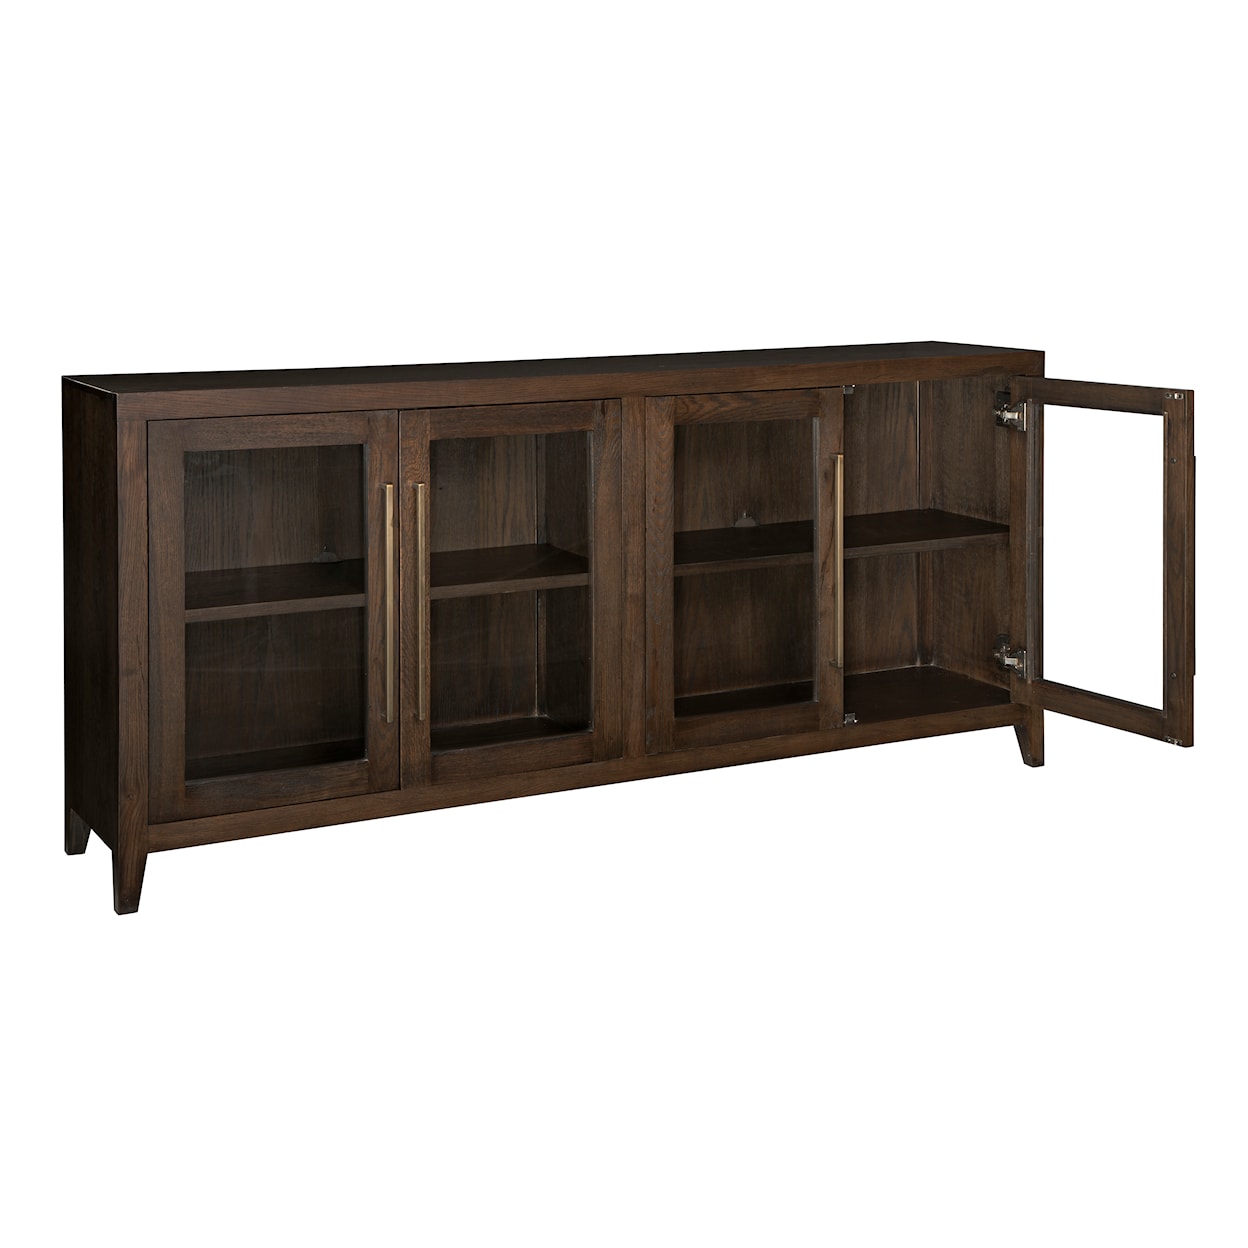 Signature Design by Ashley Balintmore Accent Cabinet